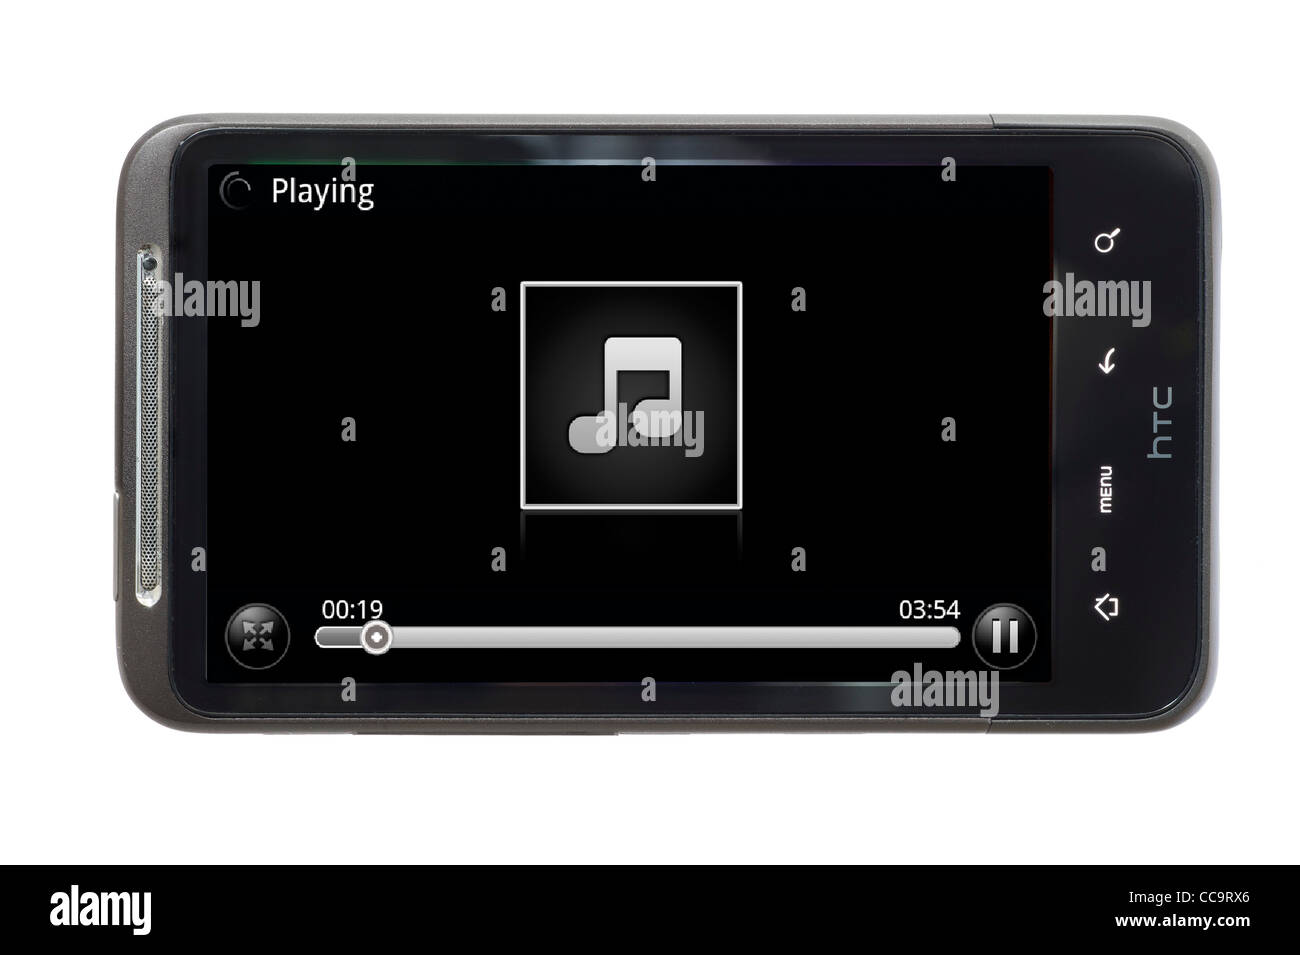 Playing an MP3 music track on an android HTC smartphone Stock Photo